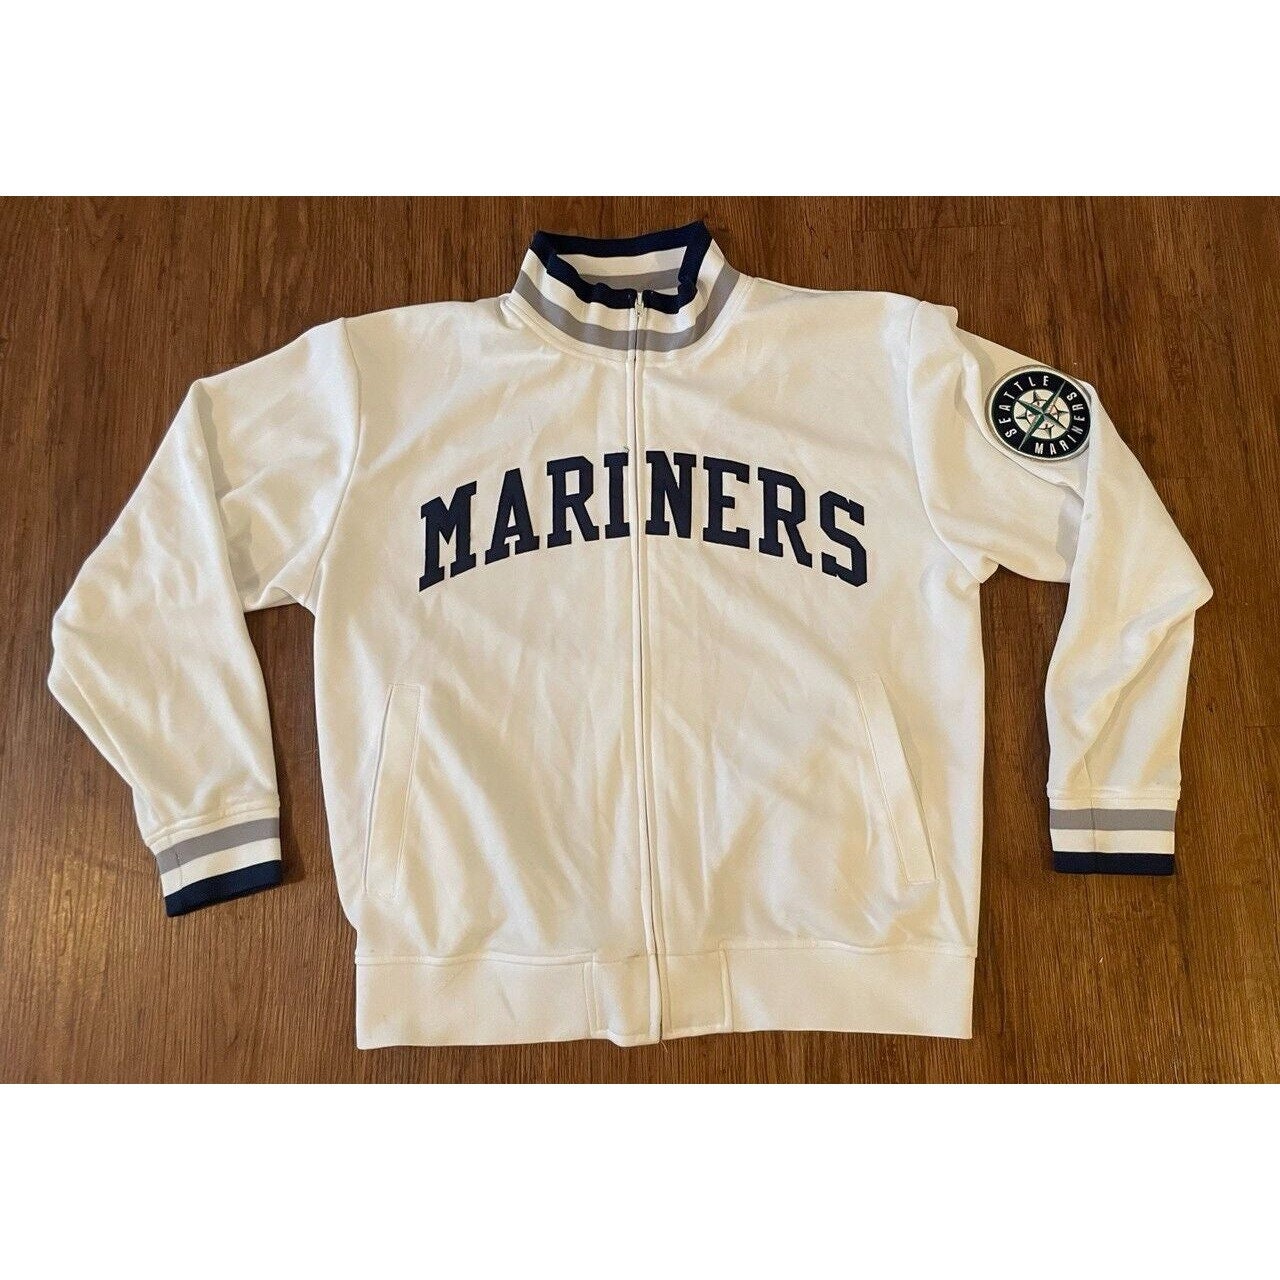 Men's Seattle Mariners Majestic White Home Cool Base Jersey